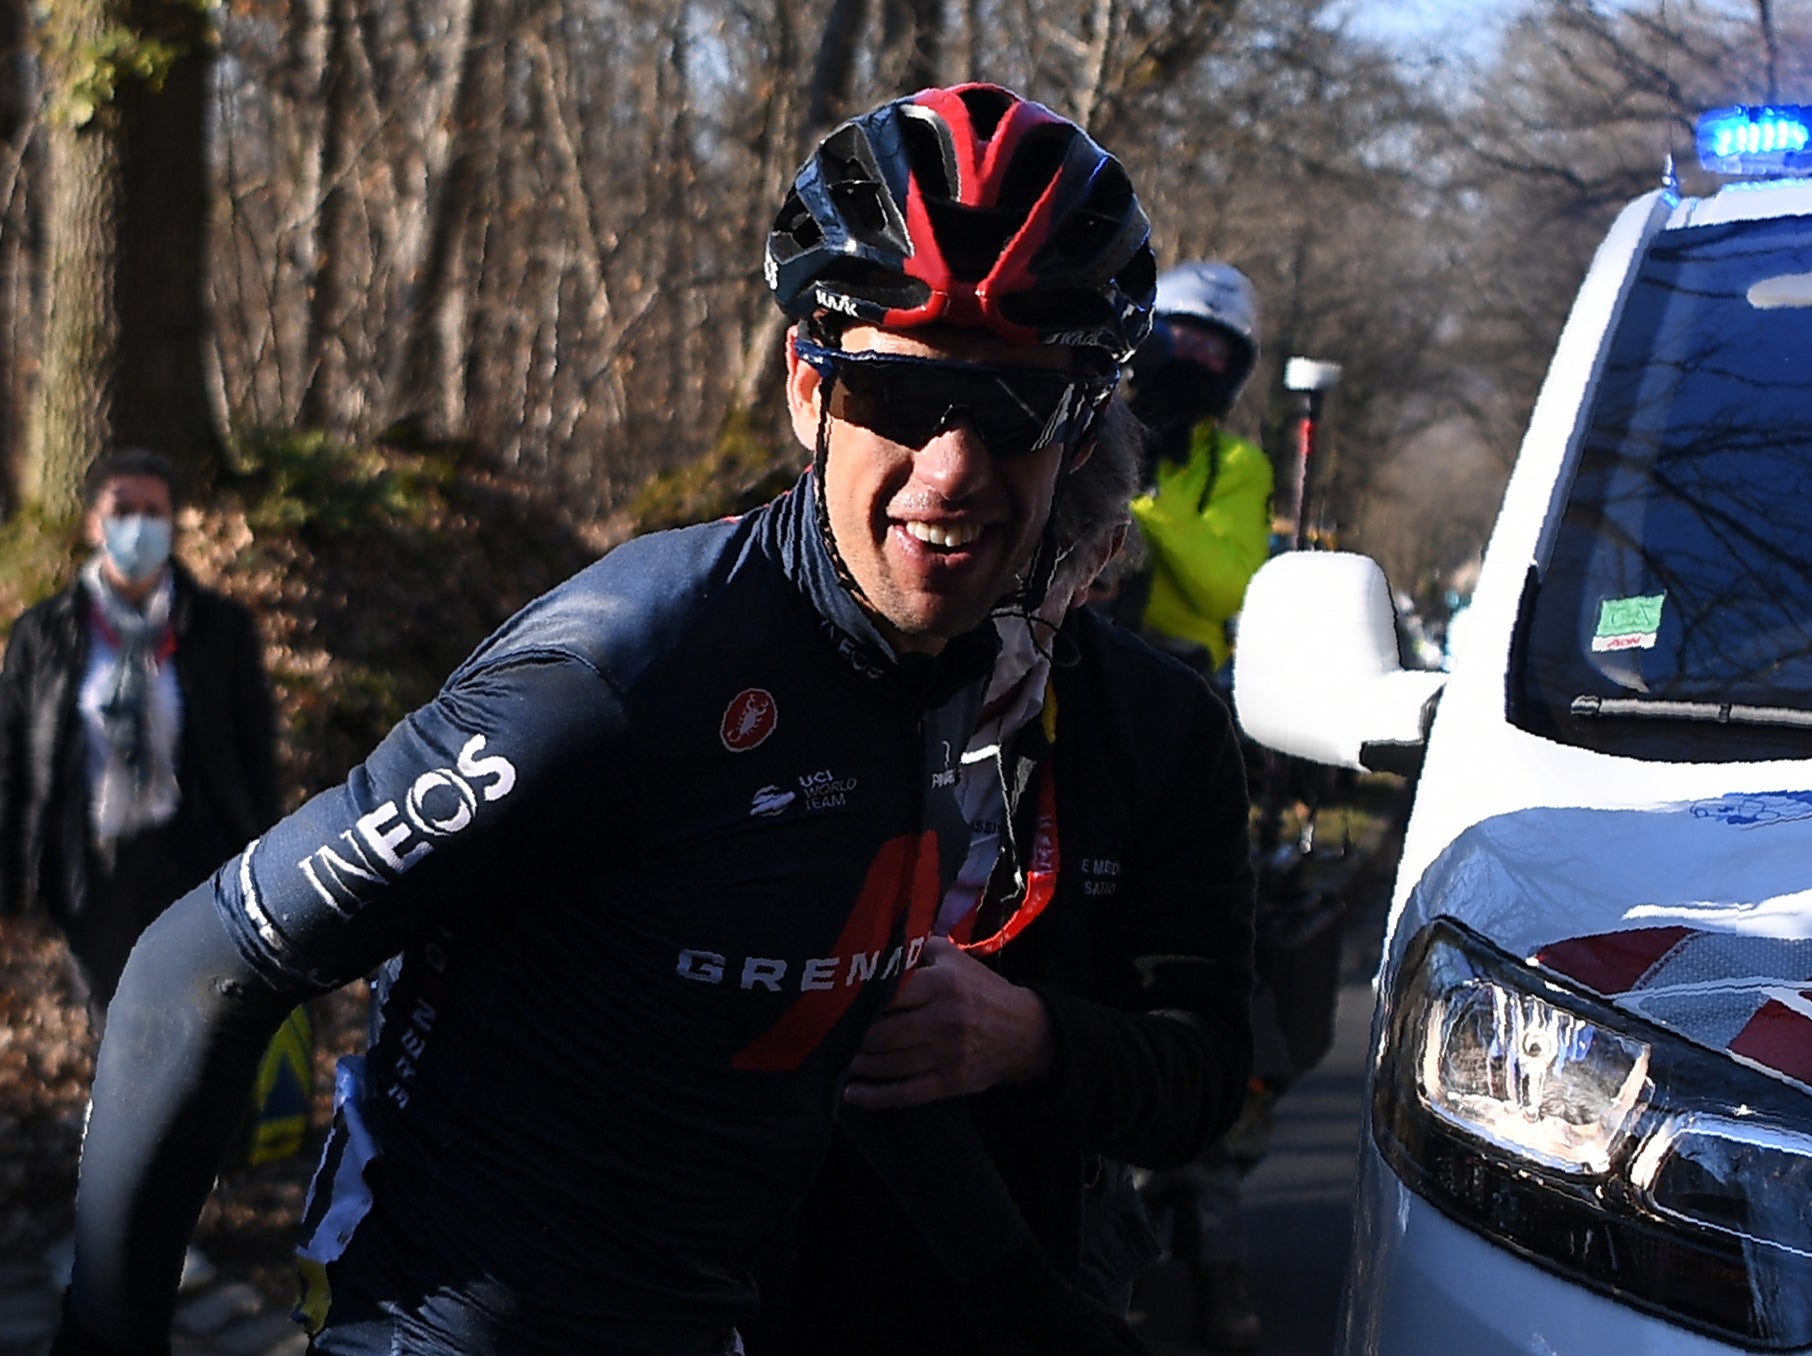 Richie Porte after his fall in stage one of Paris-Nice